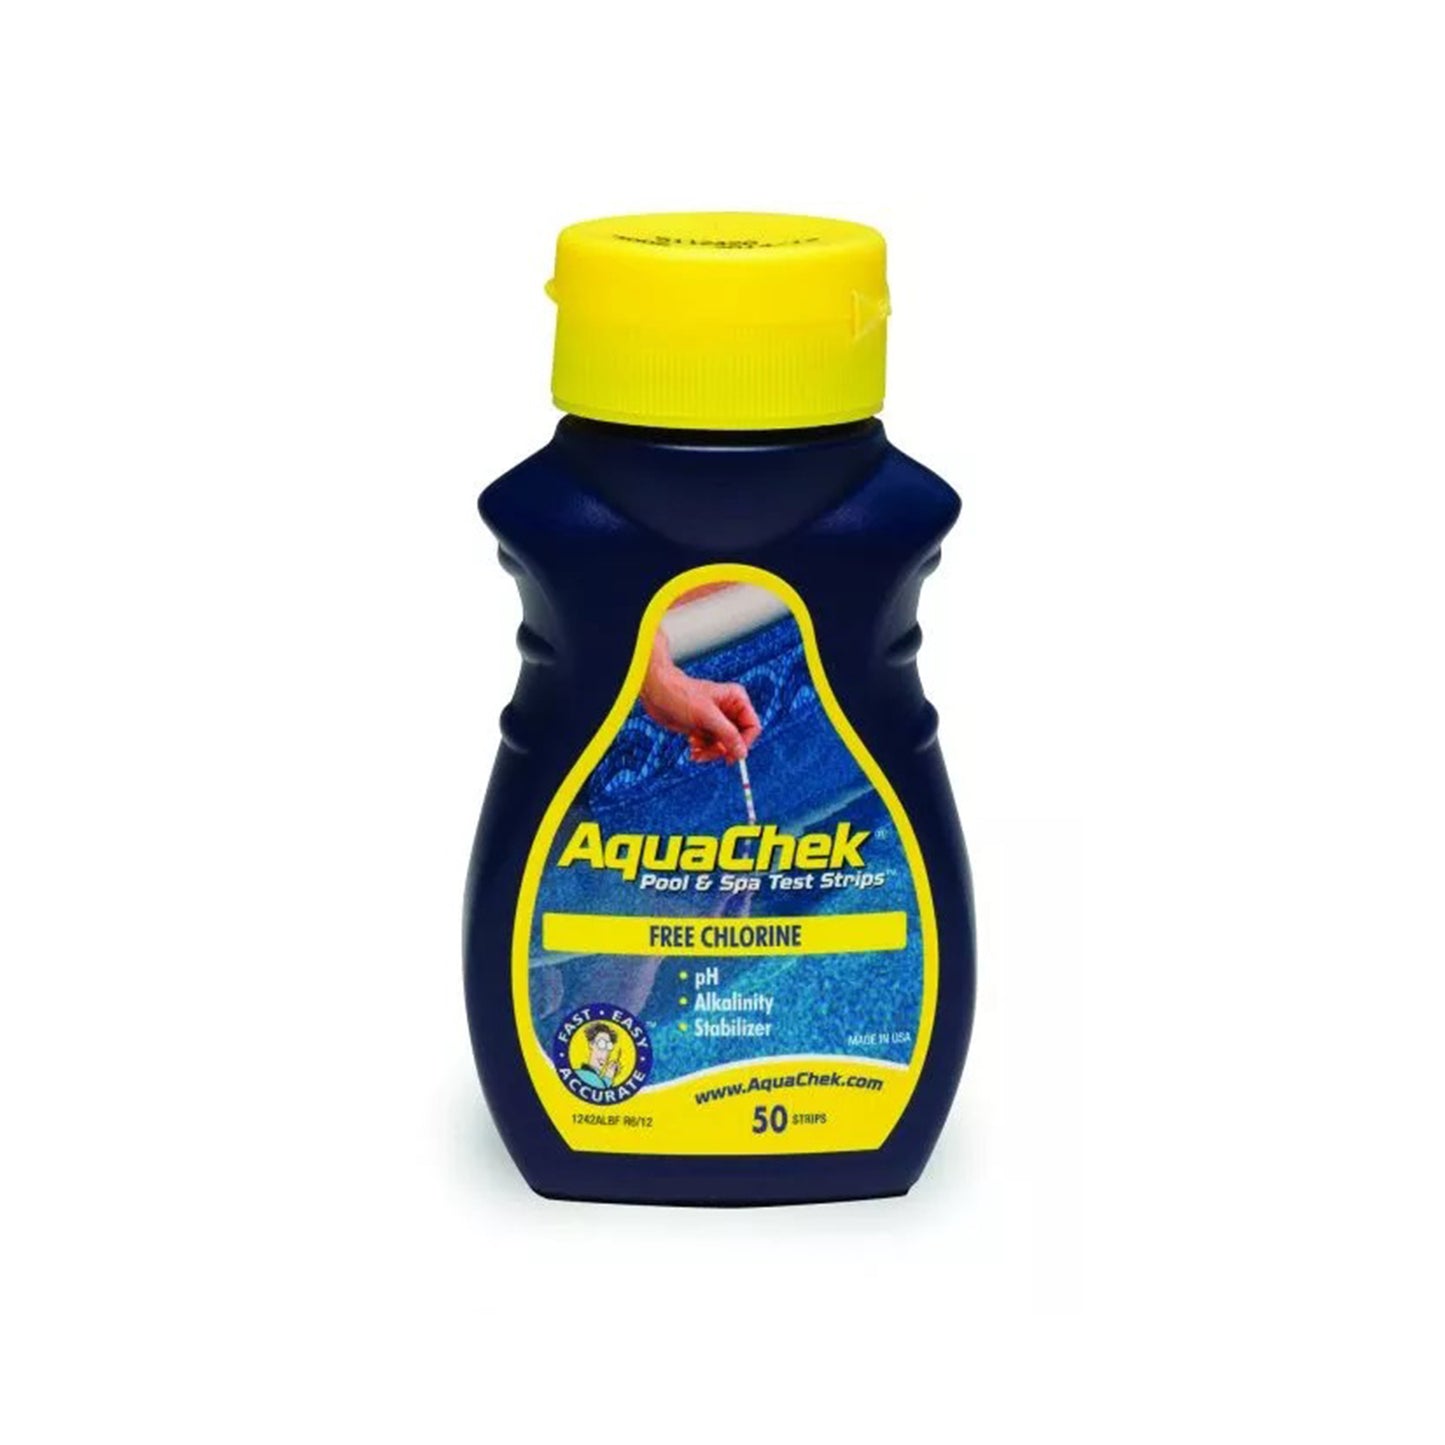 Bottle of chlorine test strips by aqua chek. Navy blue bottle, yellow lid and image label. Cut out image on plain white background.